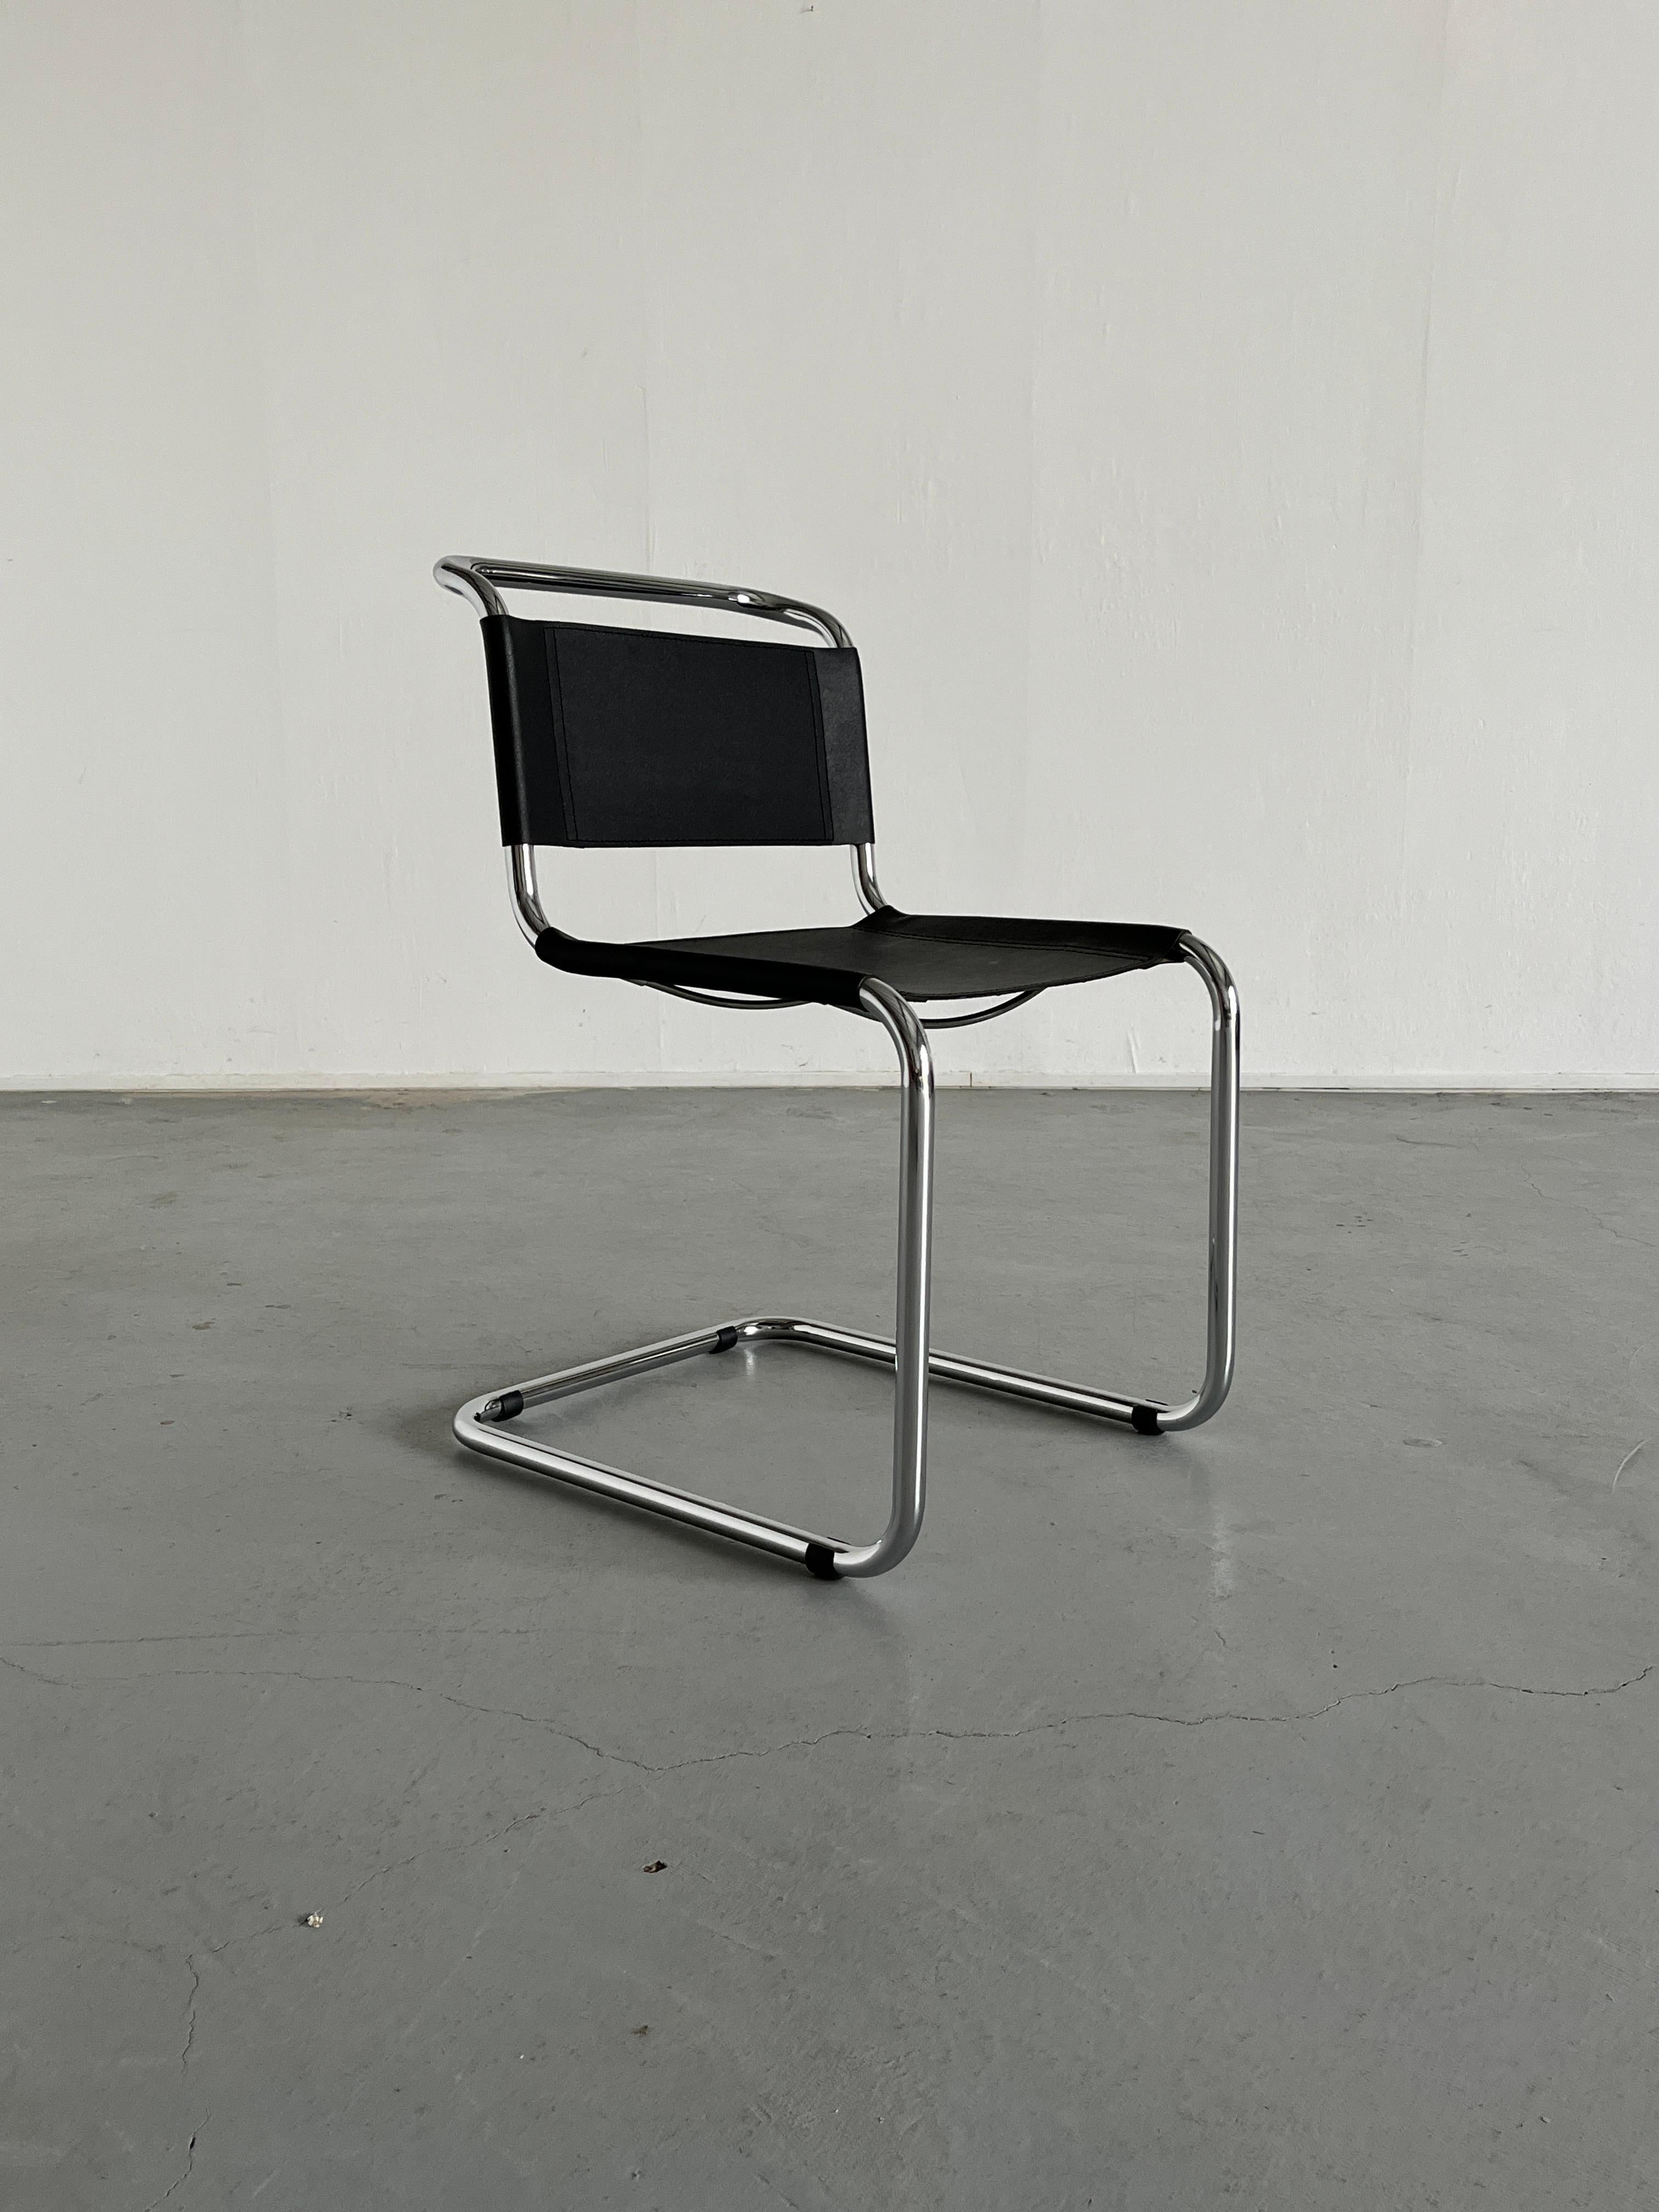 Mart Stam S33 Design Cantilever Tubular Steel and Faux Leather Chairs, 1970s For Sale 4